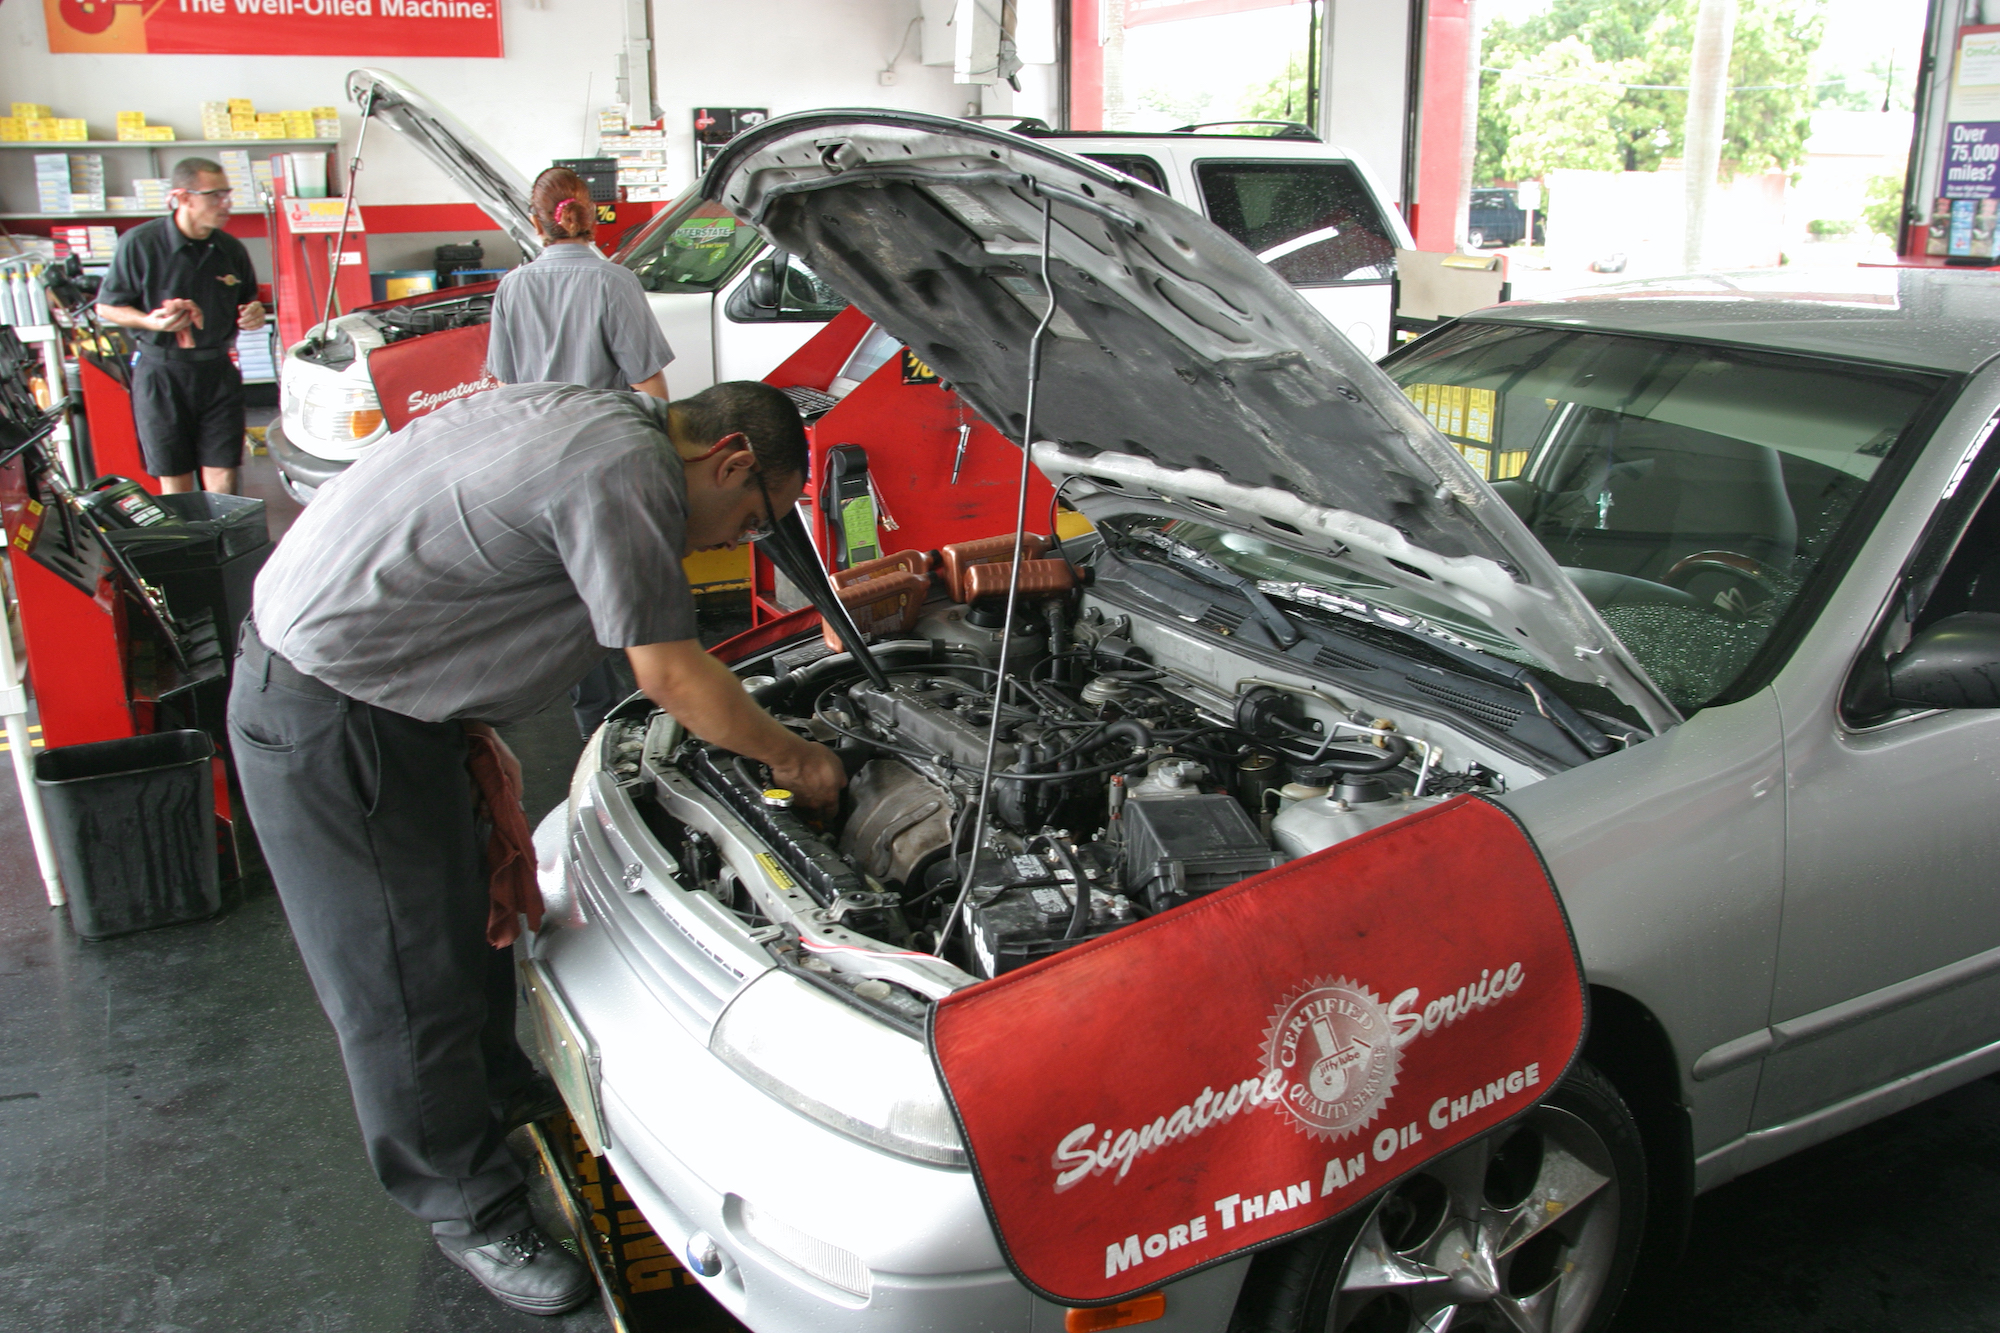 A Jiffy Lube mechanic changes the oil on a customer